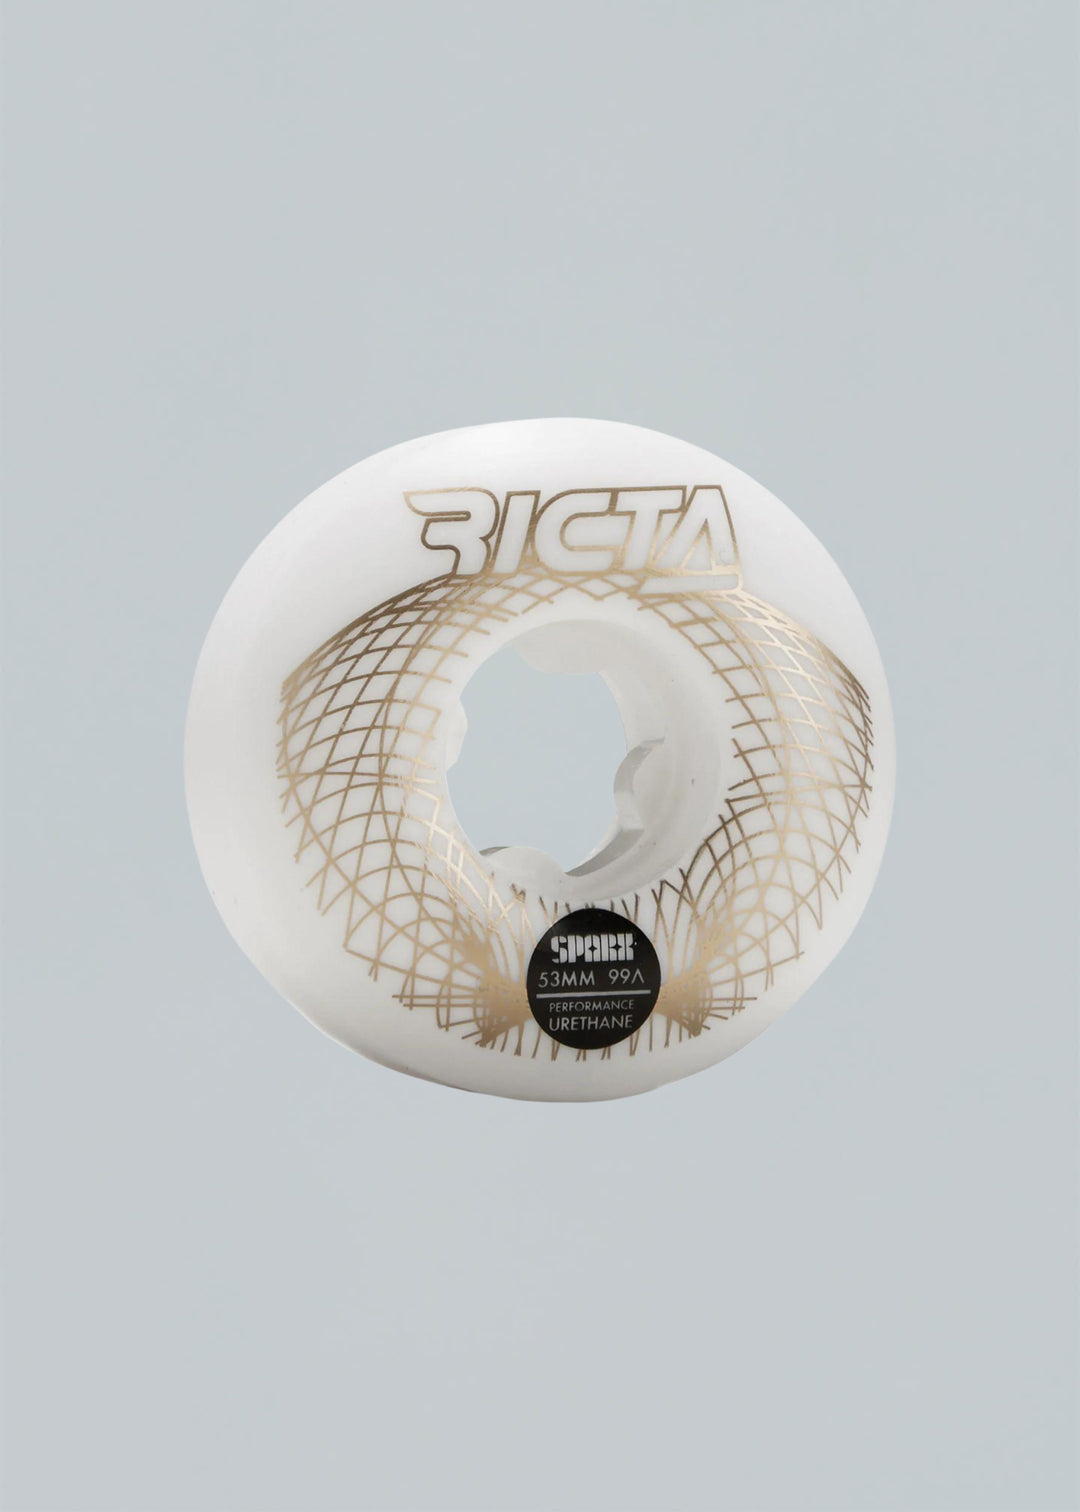 Ricta Wireframe Gold 99A 53mm